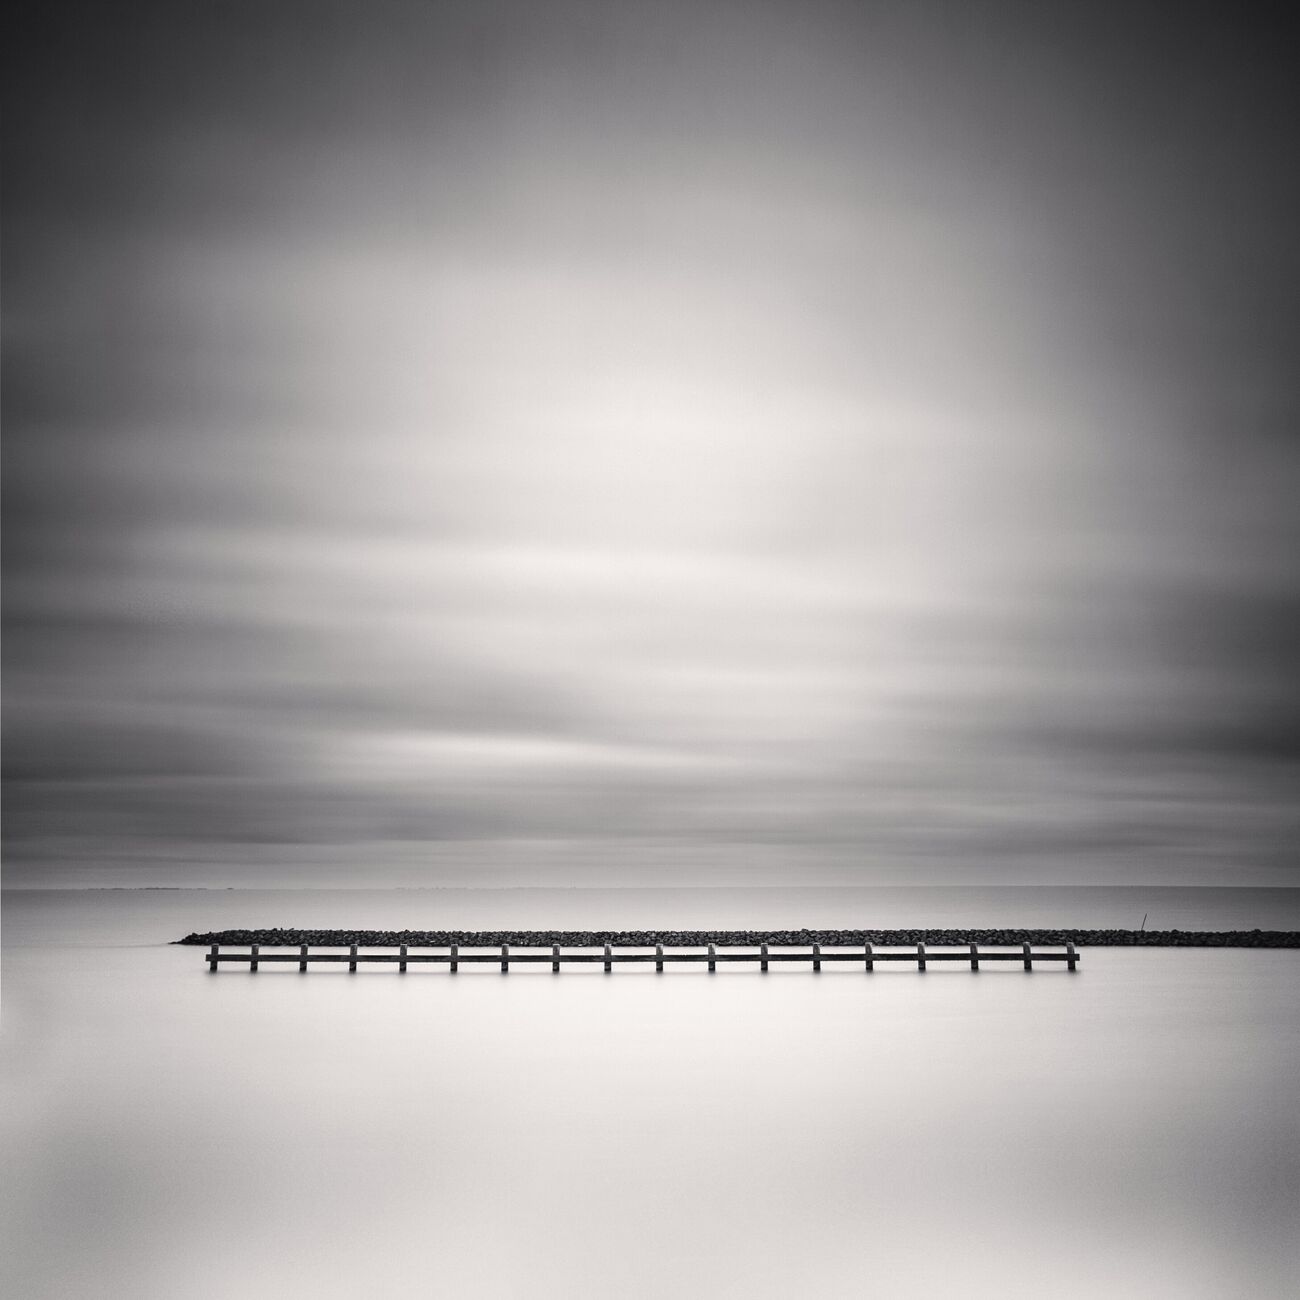 Pier In Silence, Netherlands, Pays-Bas. Avril 2015. Ref-1316 - Denis Olivier Photographie